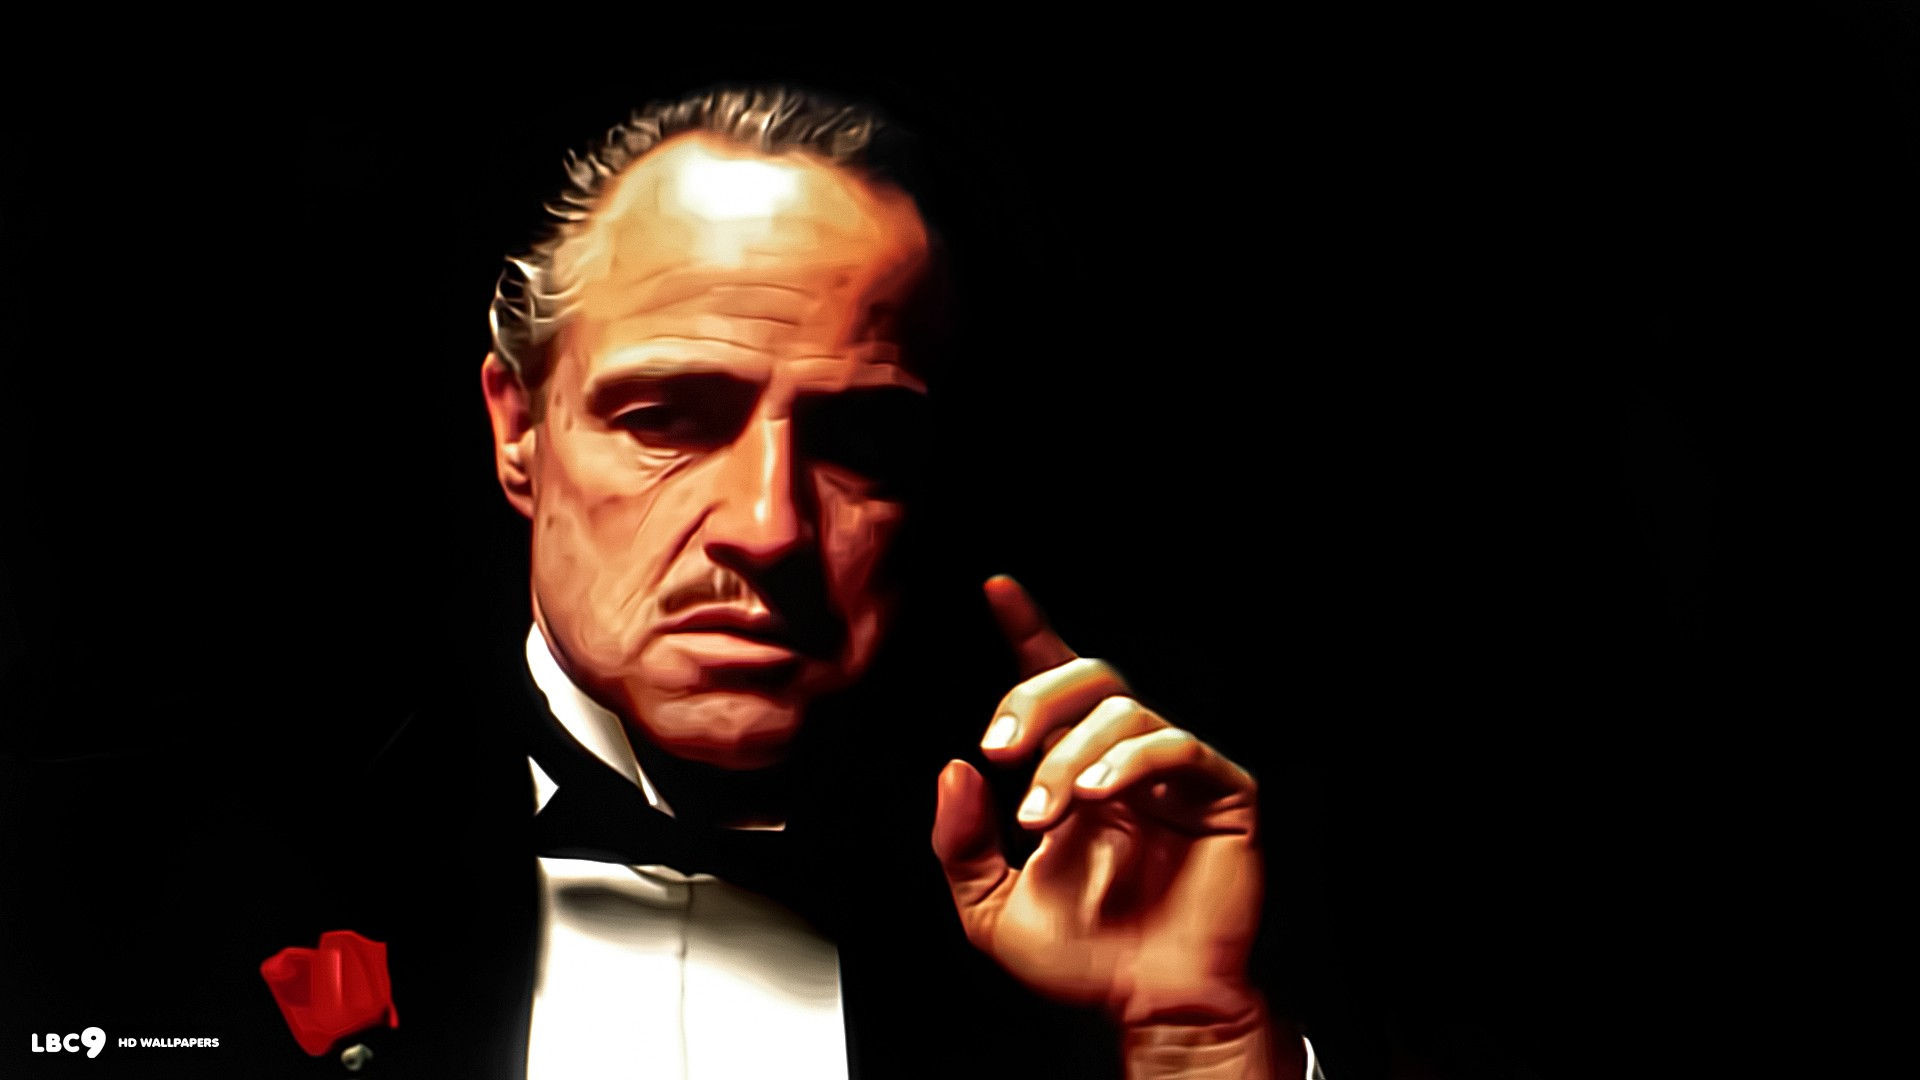 1920x1080 The Godfather 2 Wallpapers Wallpapers) – Adorable Wallpapers